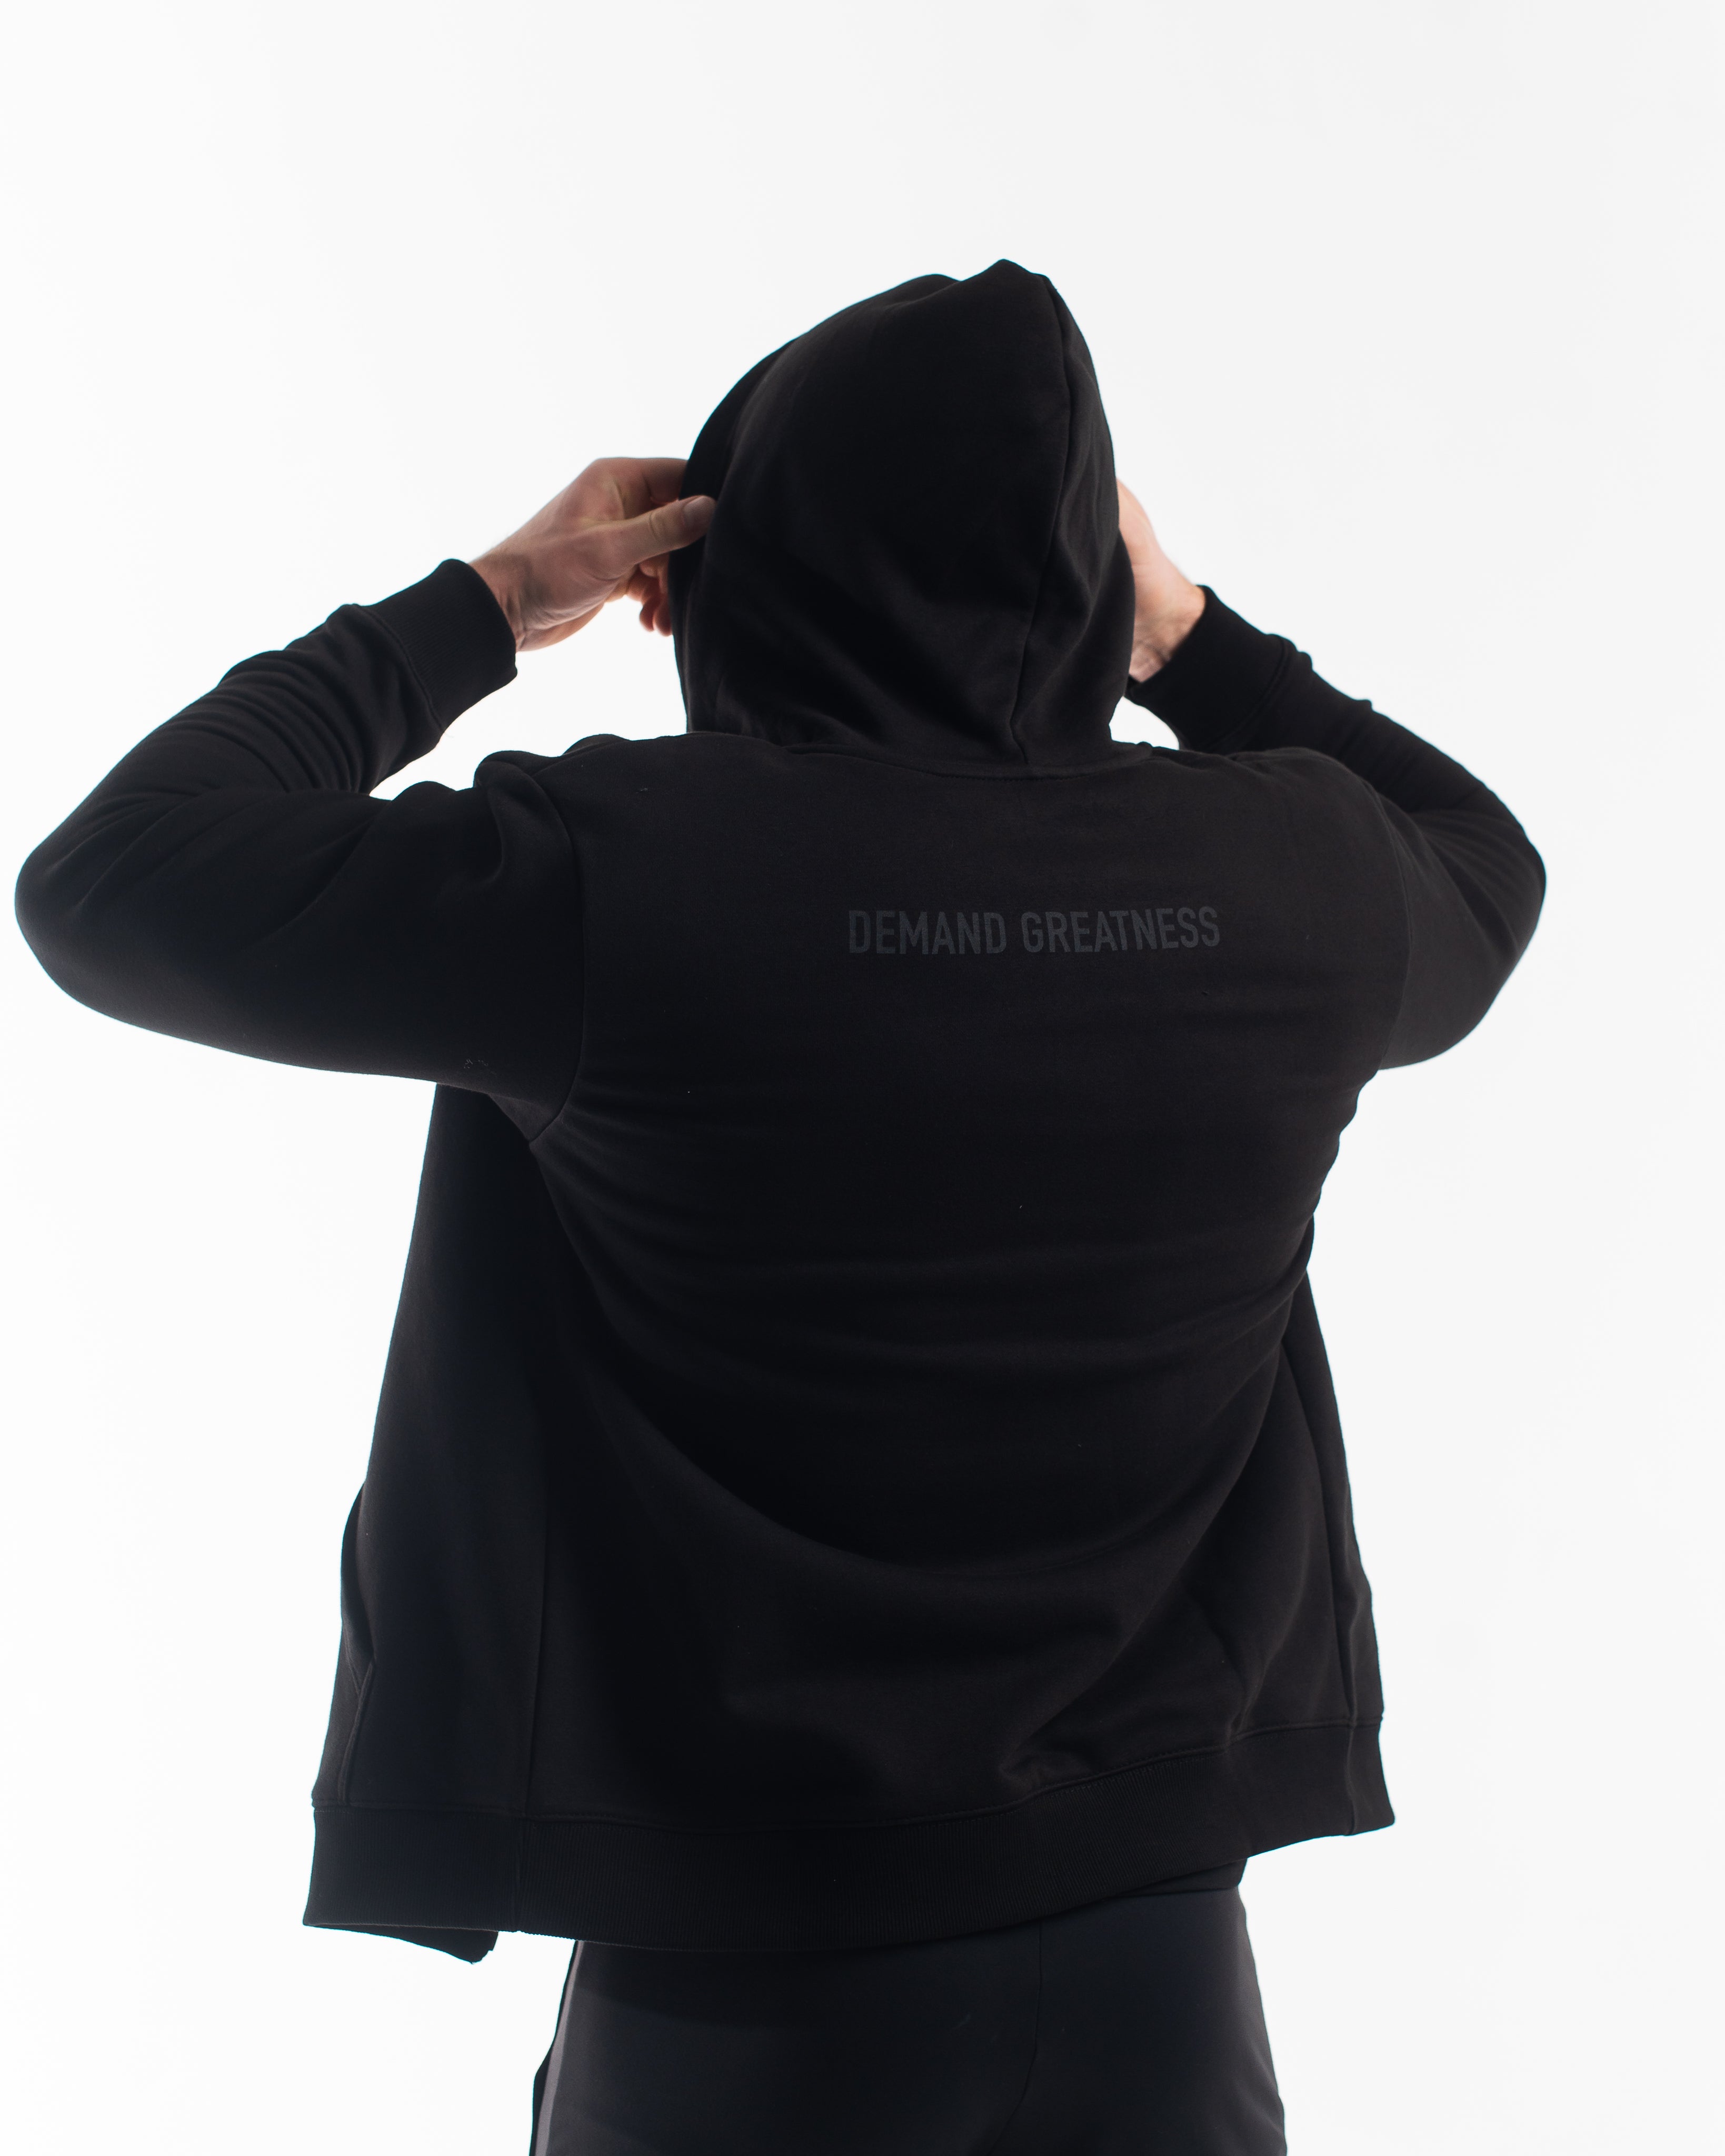 Stealth Demand Greatness is a zip up hoodie great for casual wear or lifting in the gym. Purchase Stealth zip up hoodie in UK and Europe from A7 UK. A7 have the best Bar Grip Tshirts, shipping to UK and Europe from A7 UK. A7UK supplies the best Powerlifting apparel for all your workouts. Genouill�res powerlifting shipping to France, Spain, Ireland, Germany, Italy, Sweden and EU.